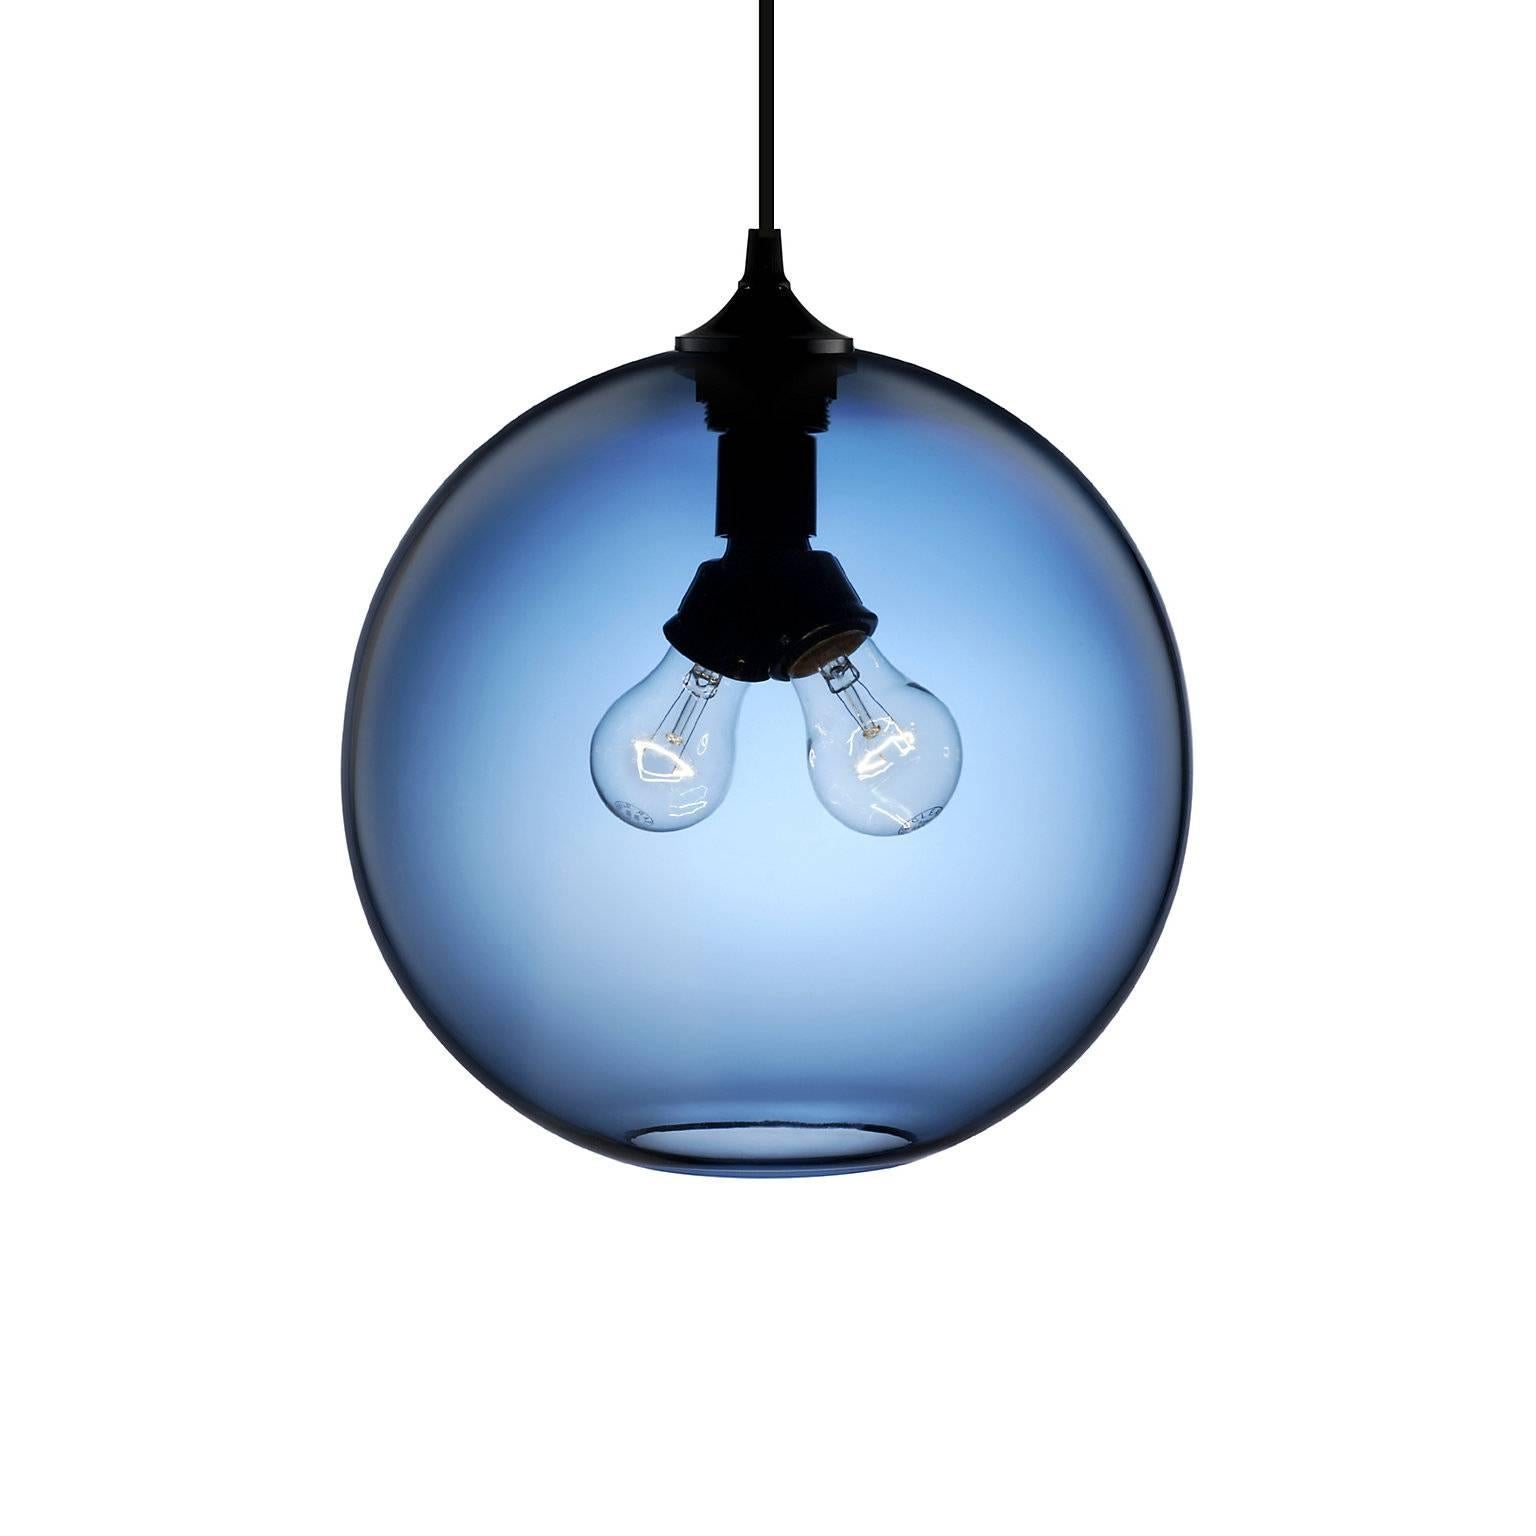 Contemporary Binary Crystal Handblown Modern Glass Pendant Light, Made in the USA For Sale